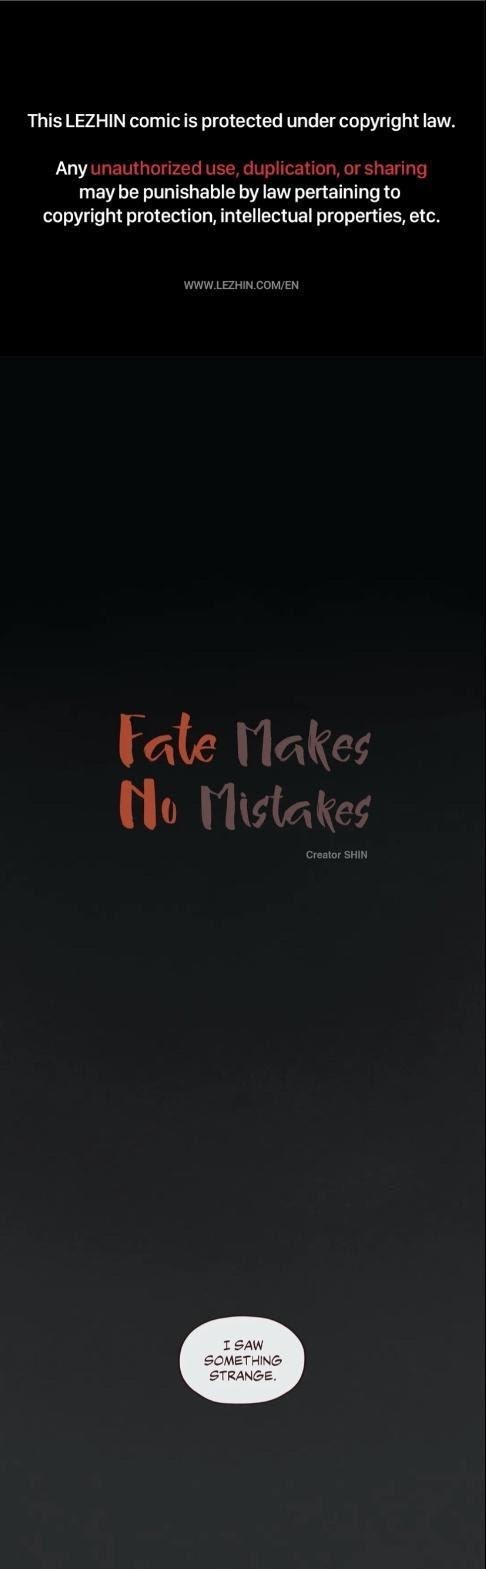 Fate Makes No Mistakes - Page 1